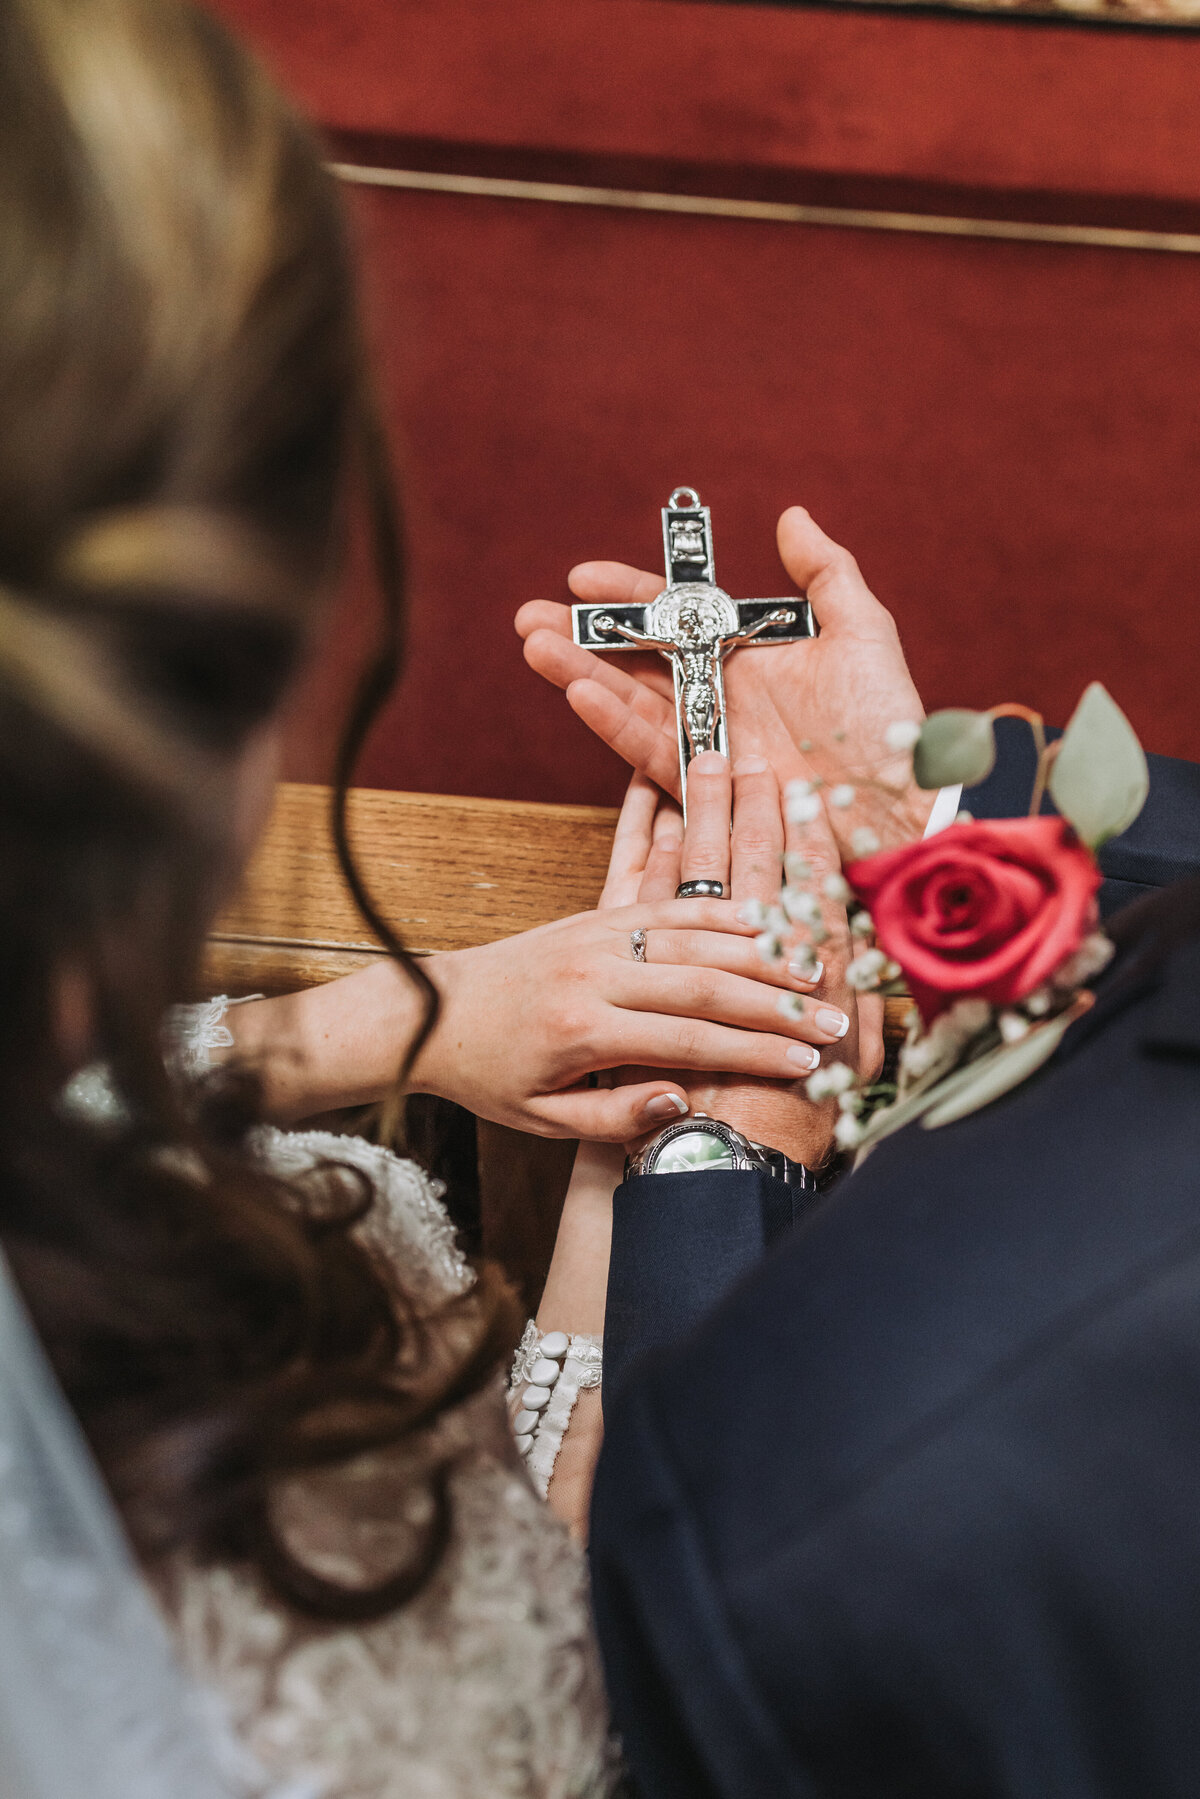 The Marriage Crucifix Wedding Tradition